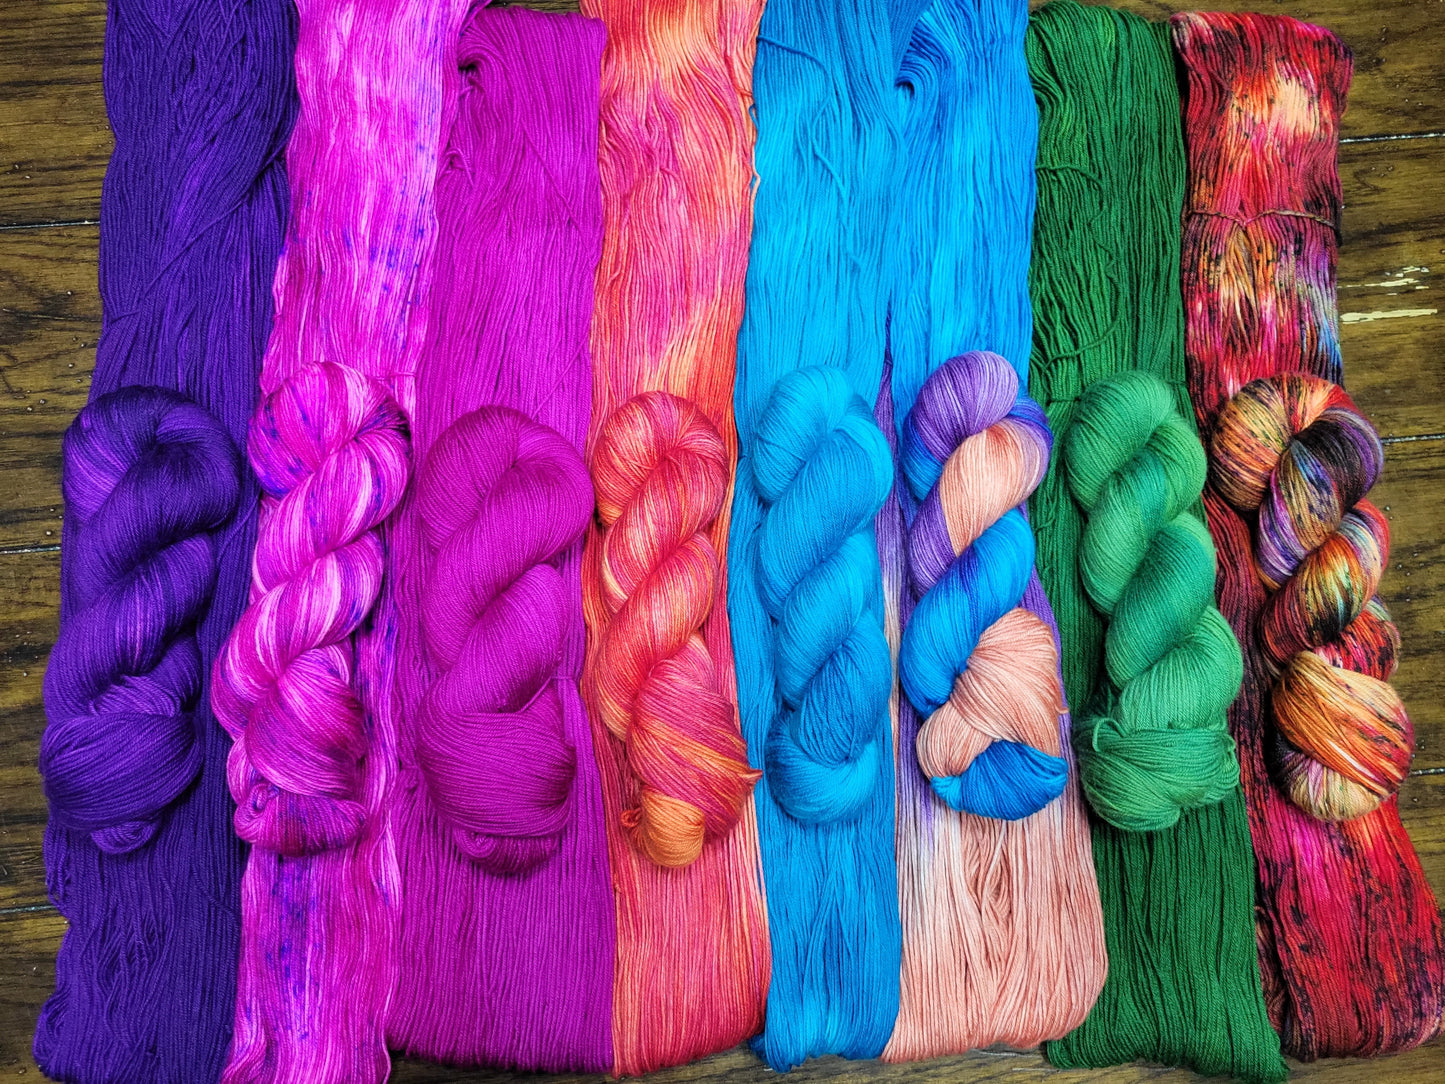 Hand Dyed Yarn - Who.Are.You?